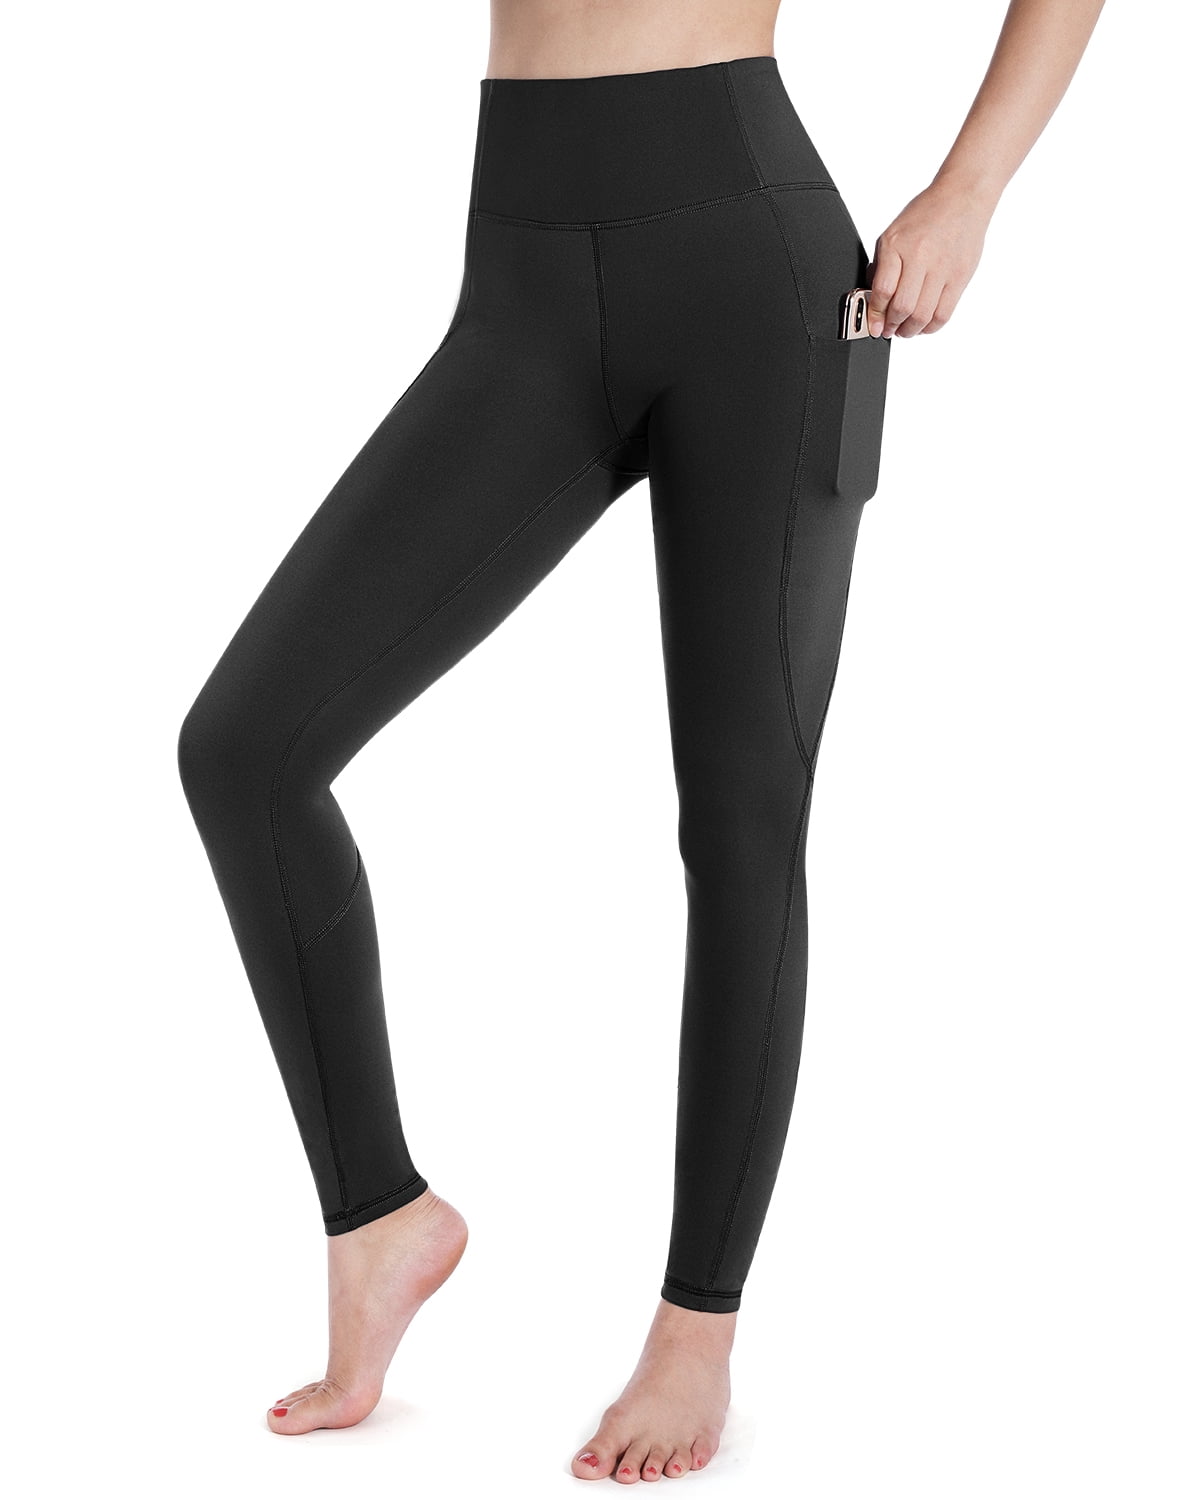 Styleword Women's Tights Legging with Side Pockets High Waist